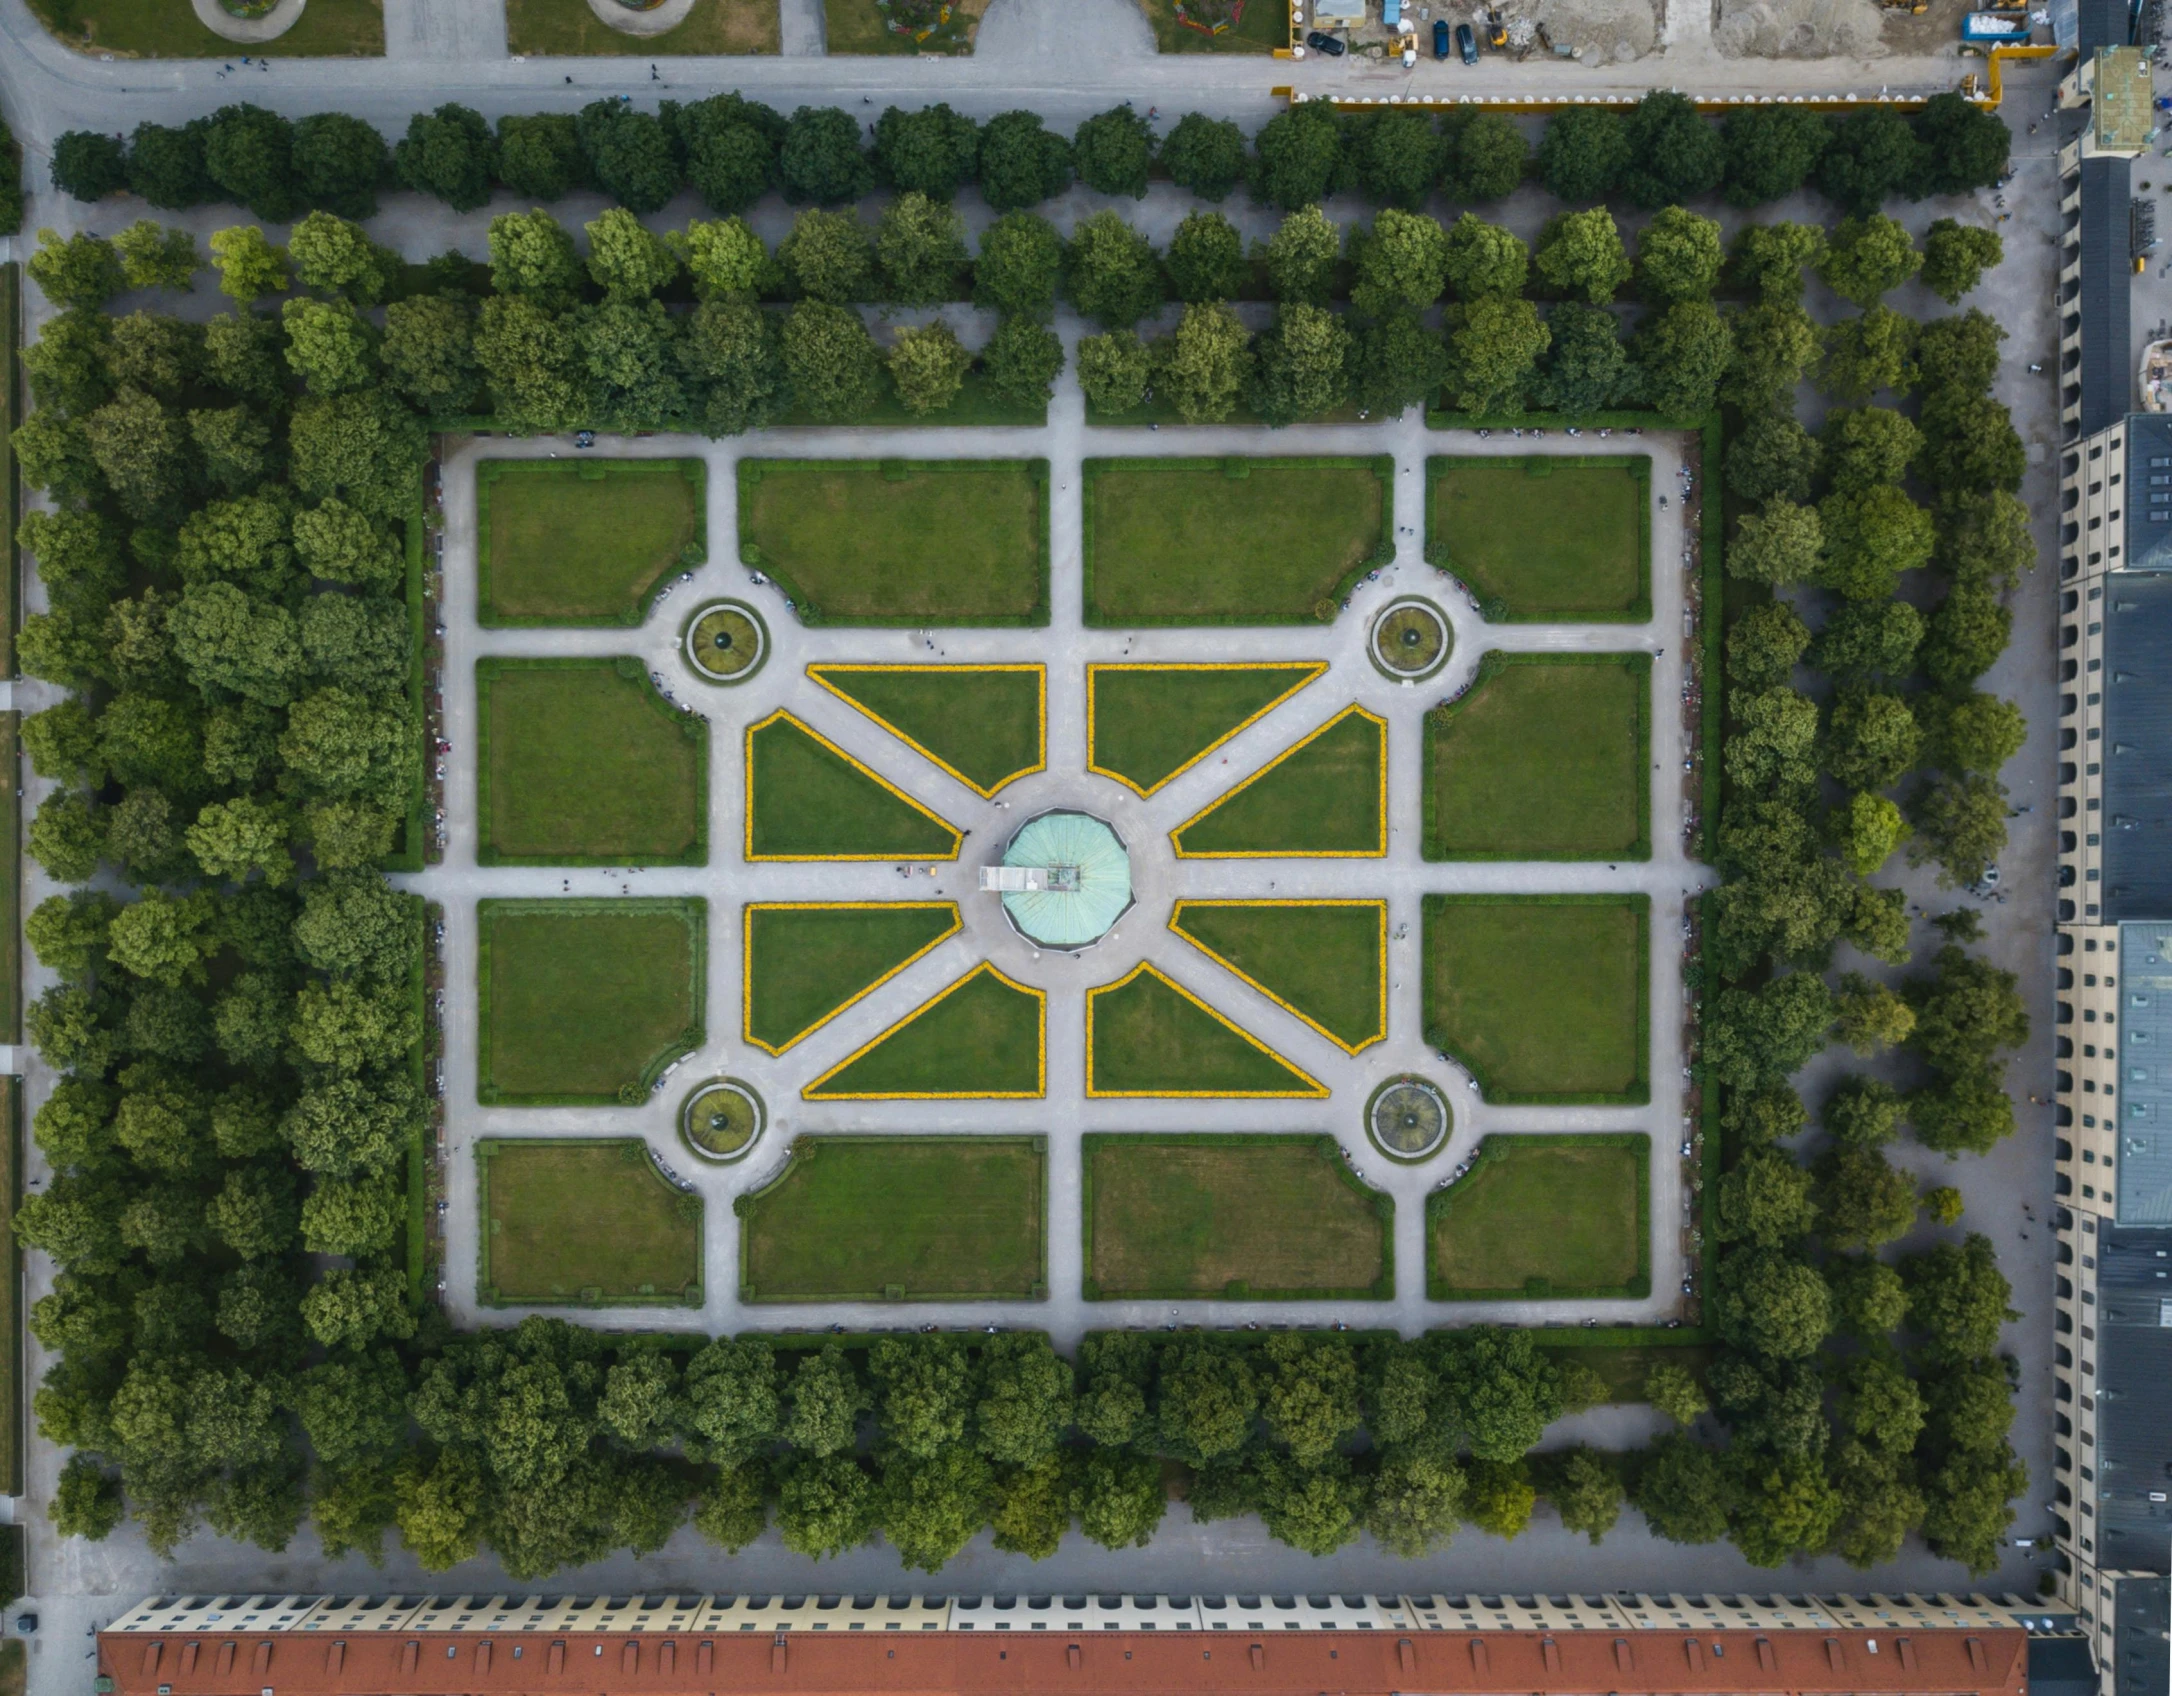 a view from above looking down on an enclosed square with trees and a clock in the middle of the center